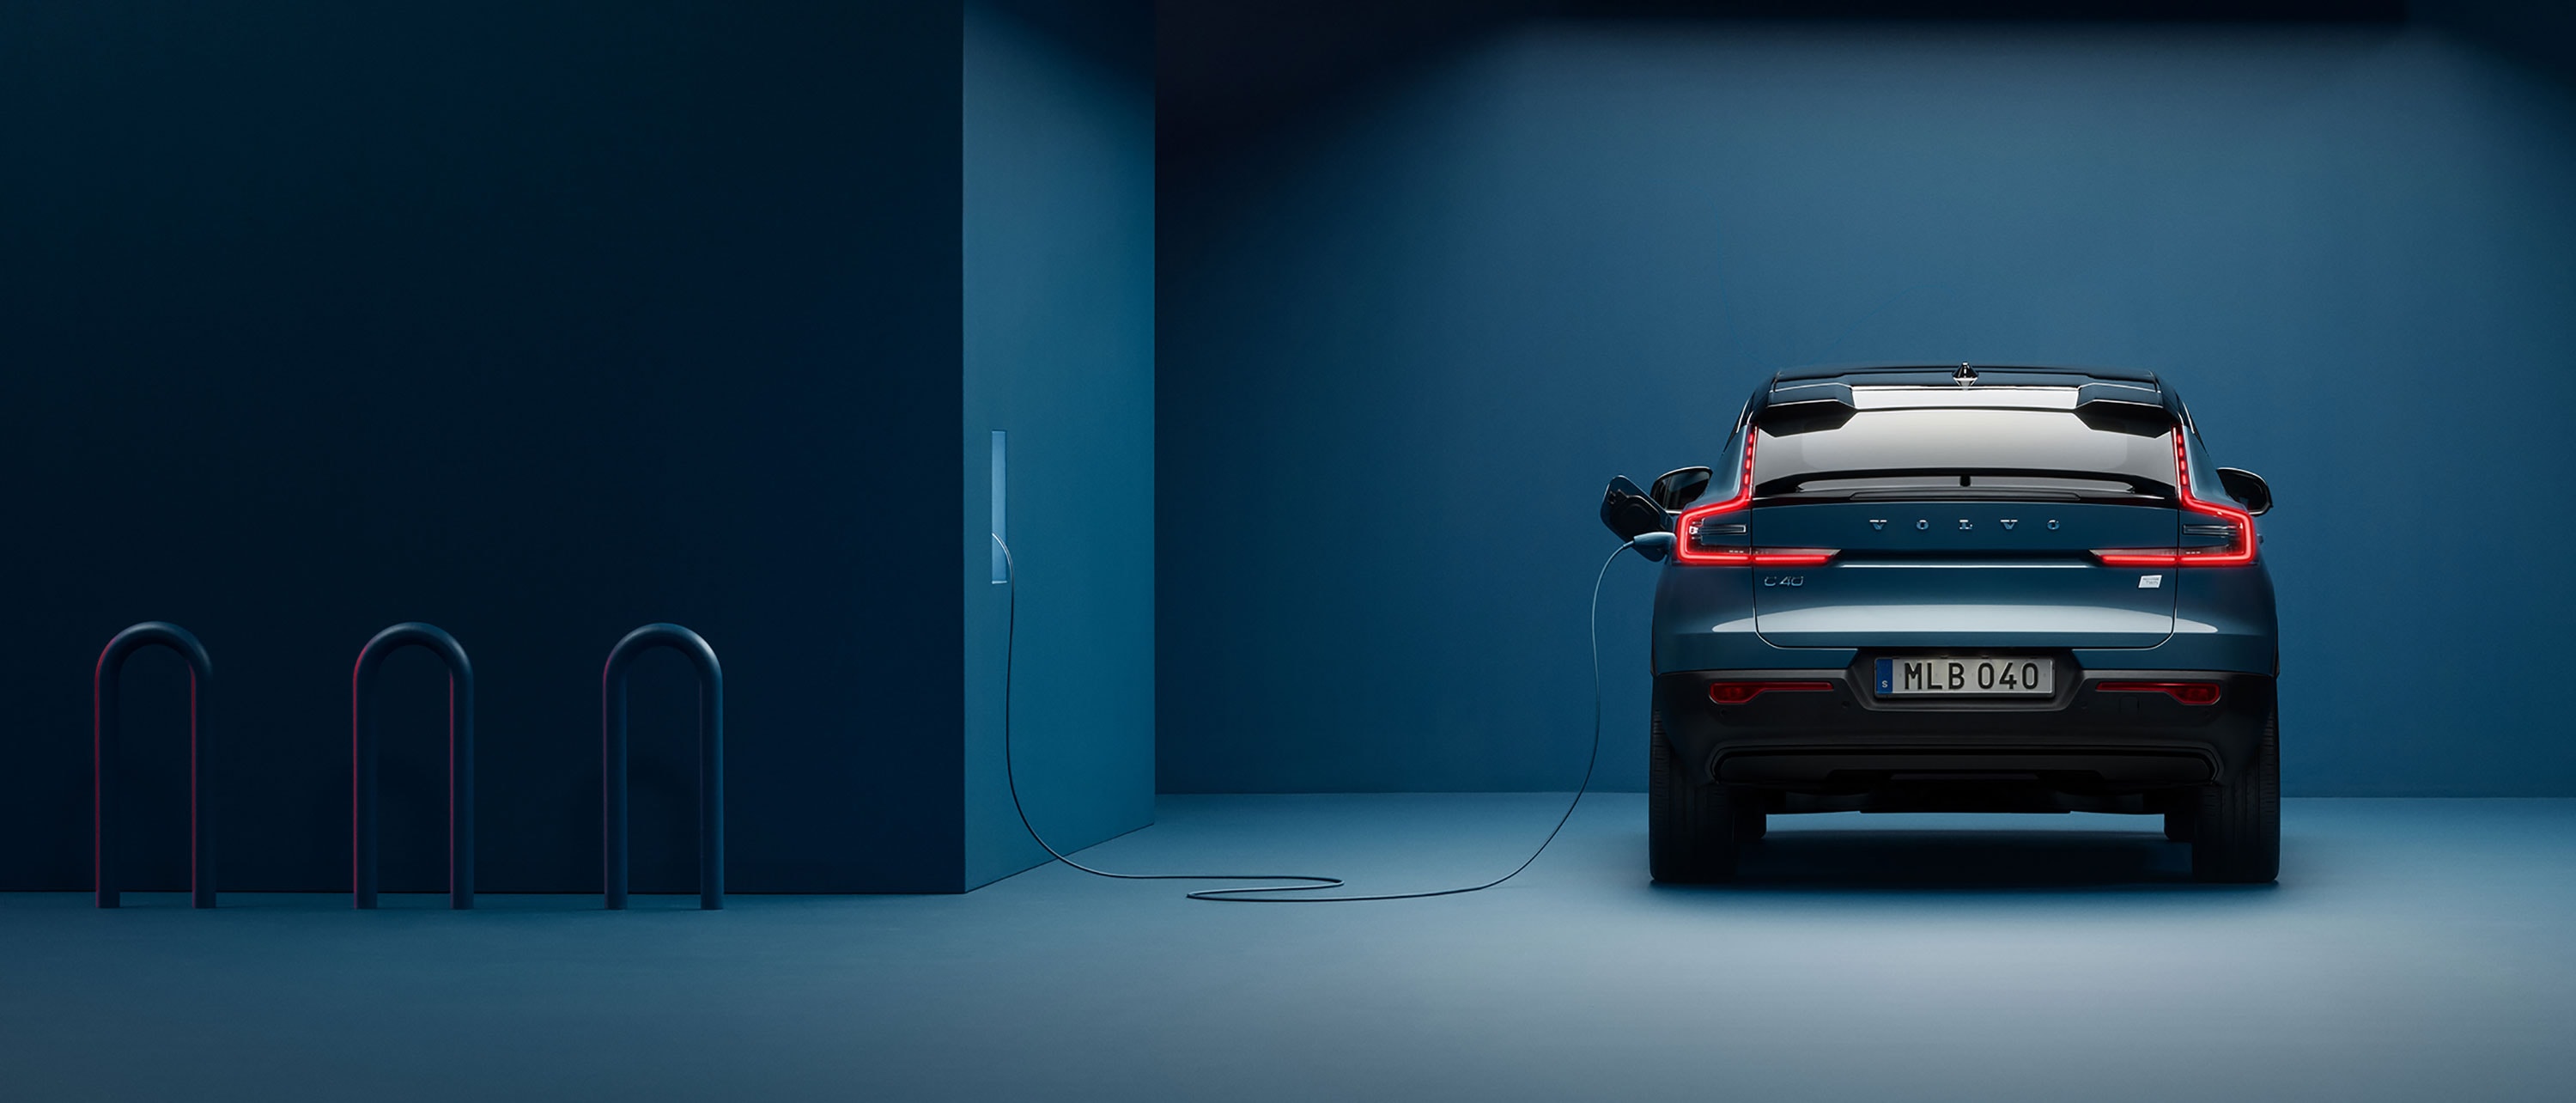 A Volvo C40 Recharge is seen from the rear being charged from a wallbox in a dark blue room.